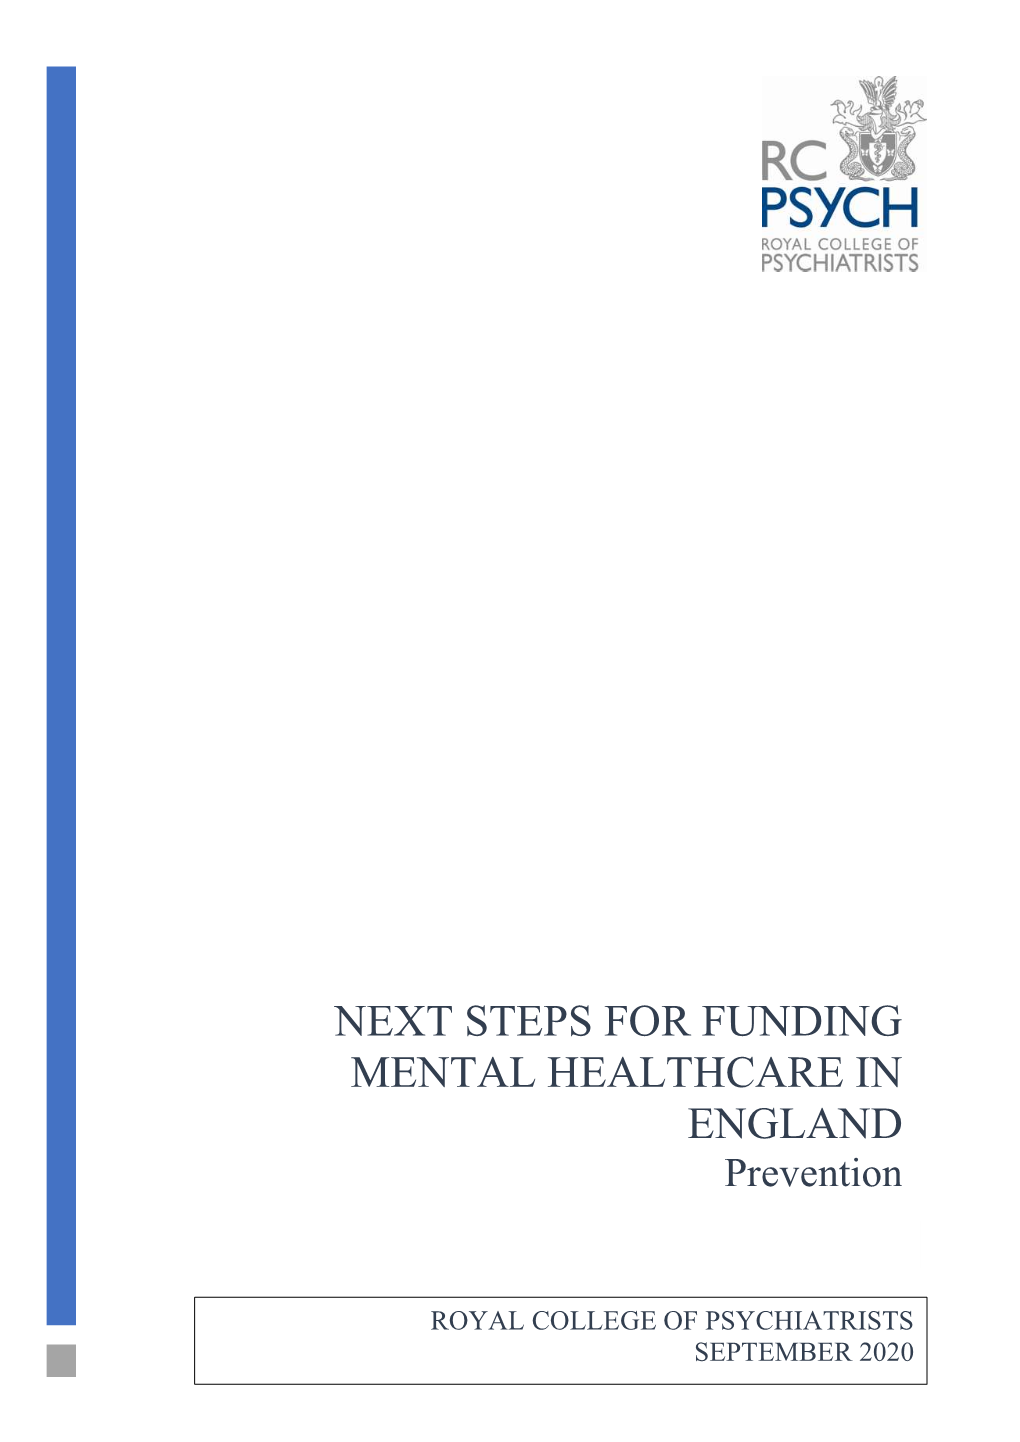 NEXT STEPS for FUNDING MENTAL HEALTHCARE in ENGLAND Prevention